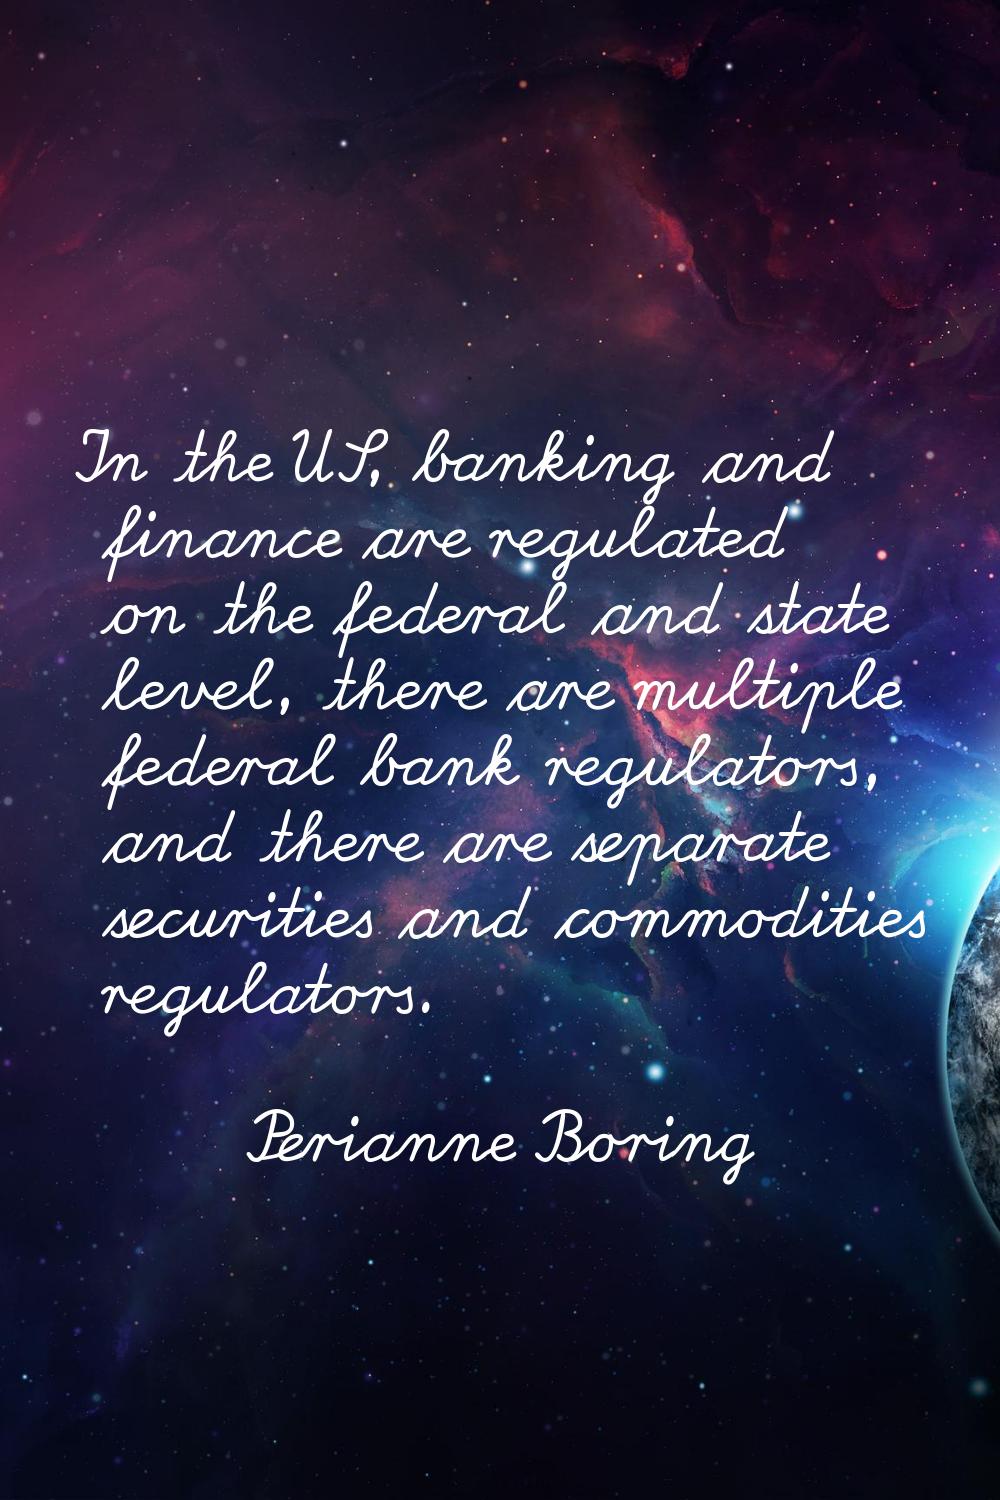 In the US, banking and finance are regulated on the federal and state level, there are multiple fed